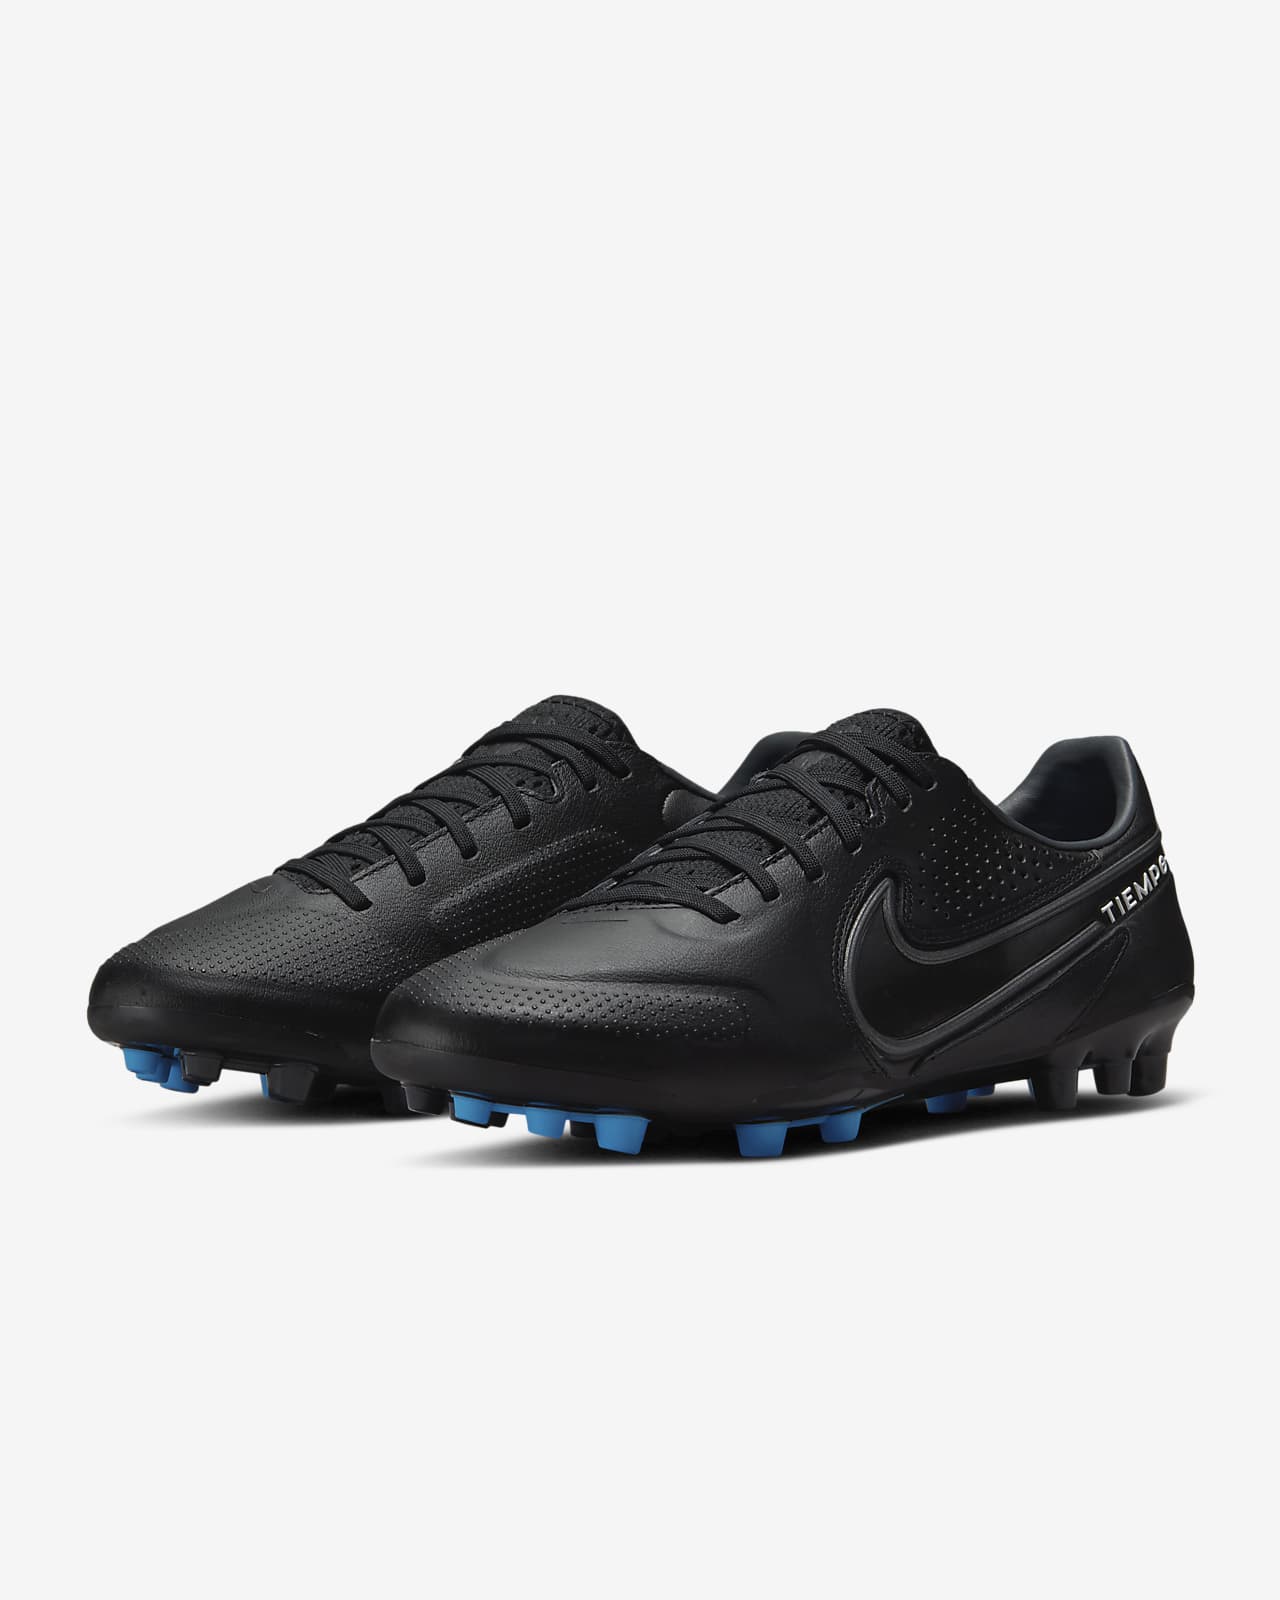 Nike Tiempo Legend 9 Pro Ag Pro Artificial Ground Football Boot Nike Cz